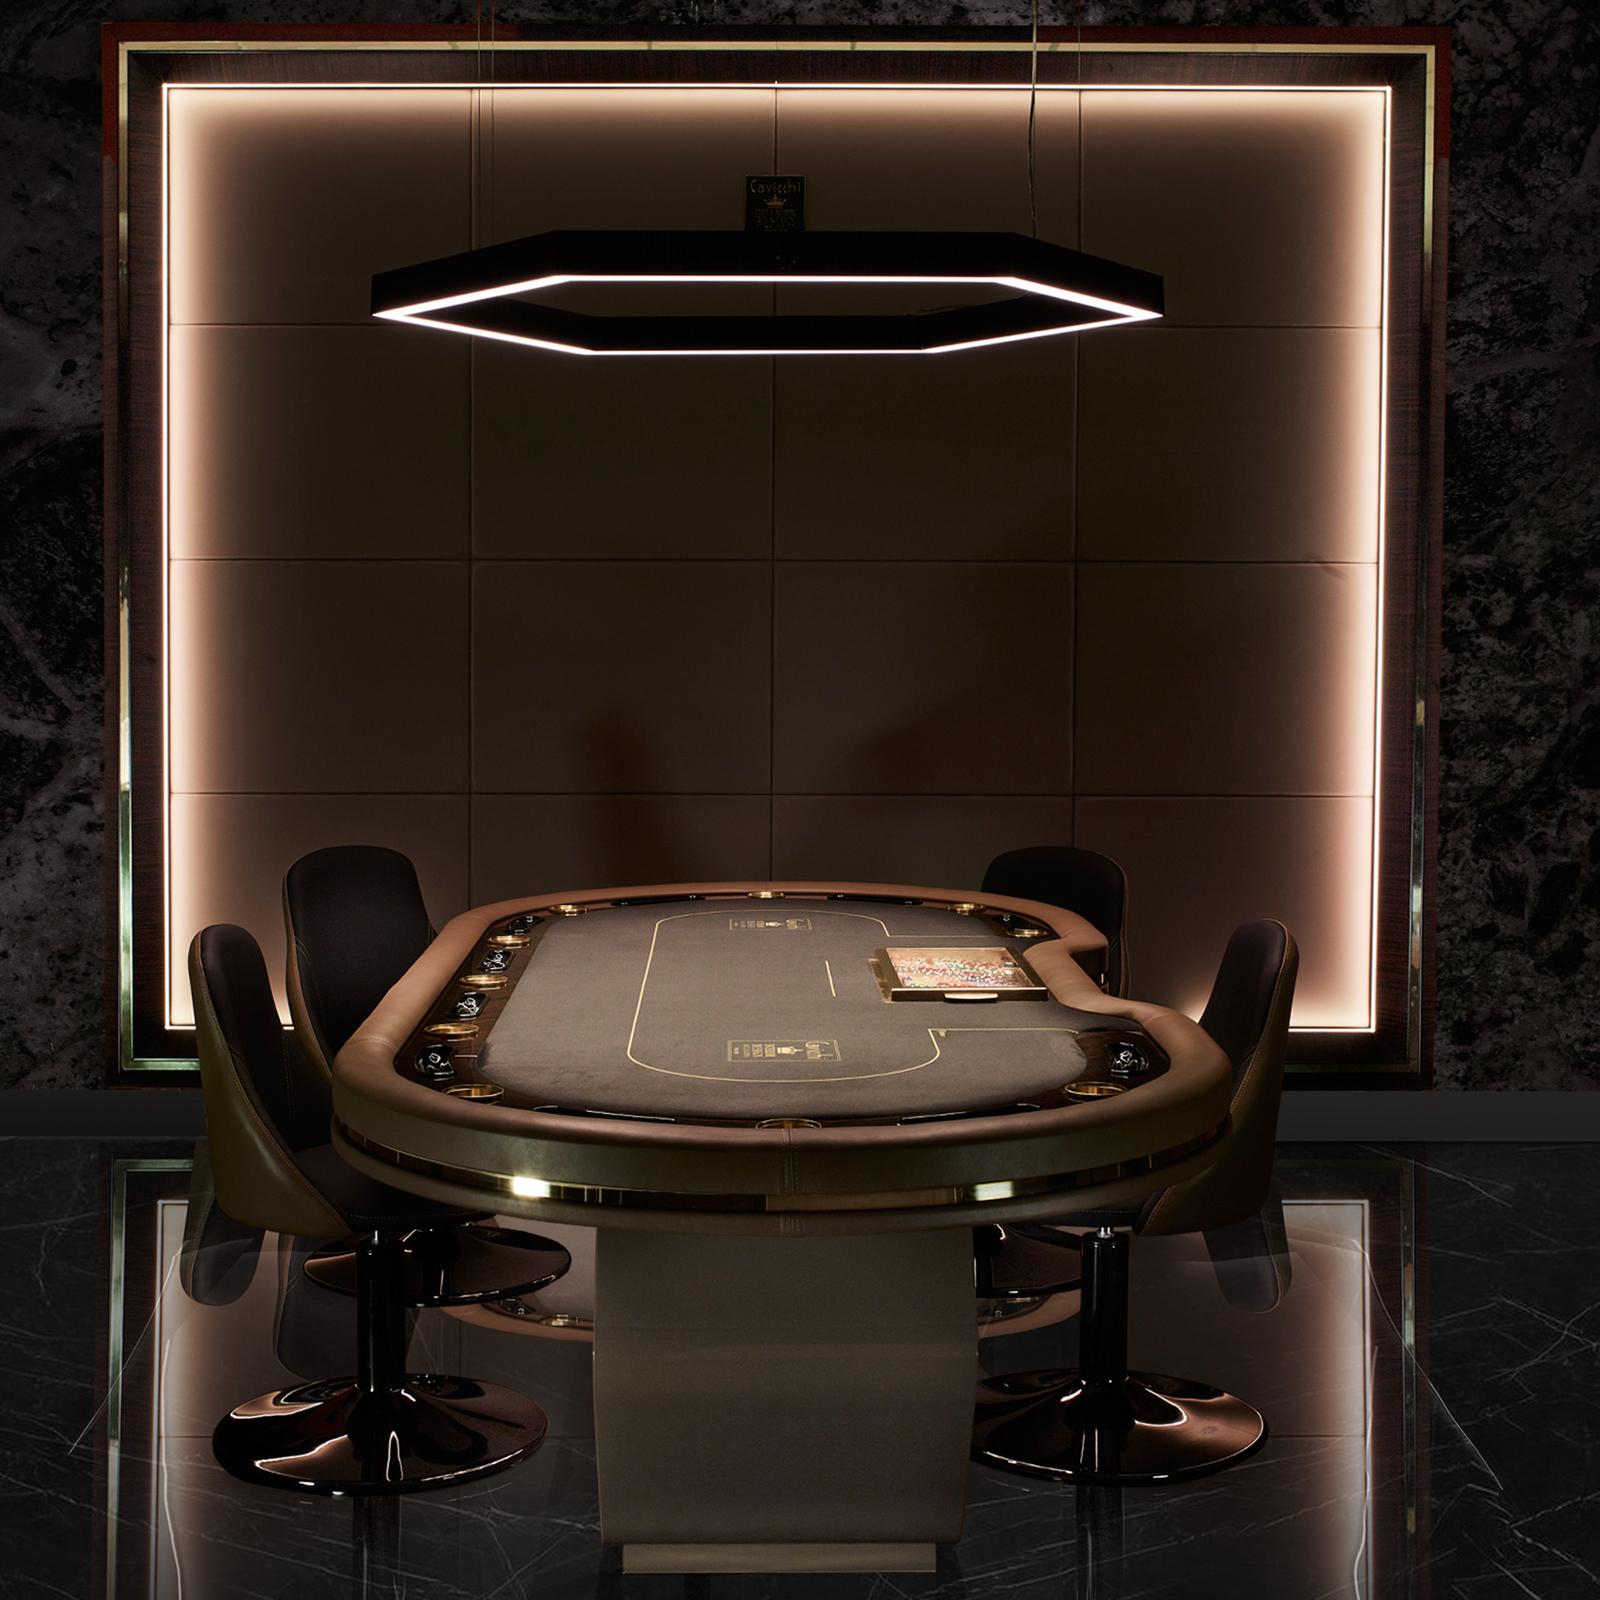 This exclusive Texas Hold'em poker table for up to 10 players is characterized by hexagonal lines. The wooden fiber panel base in Makassar ebony and Kame colored glossy finish is emphasized by LED light inserts. The ebony game board is in